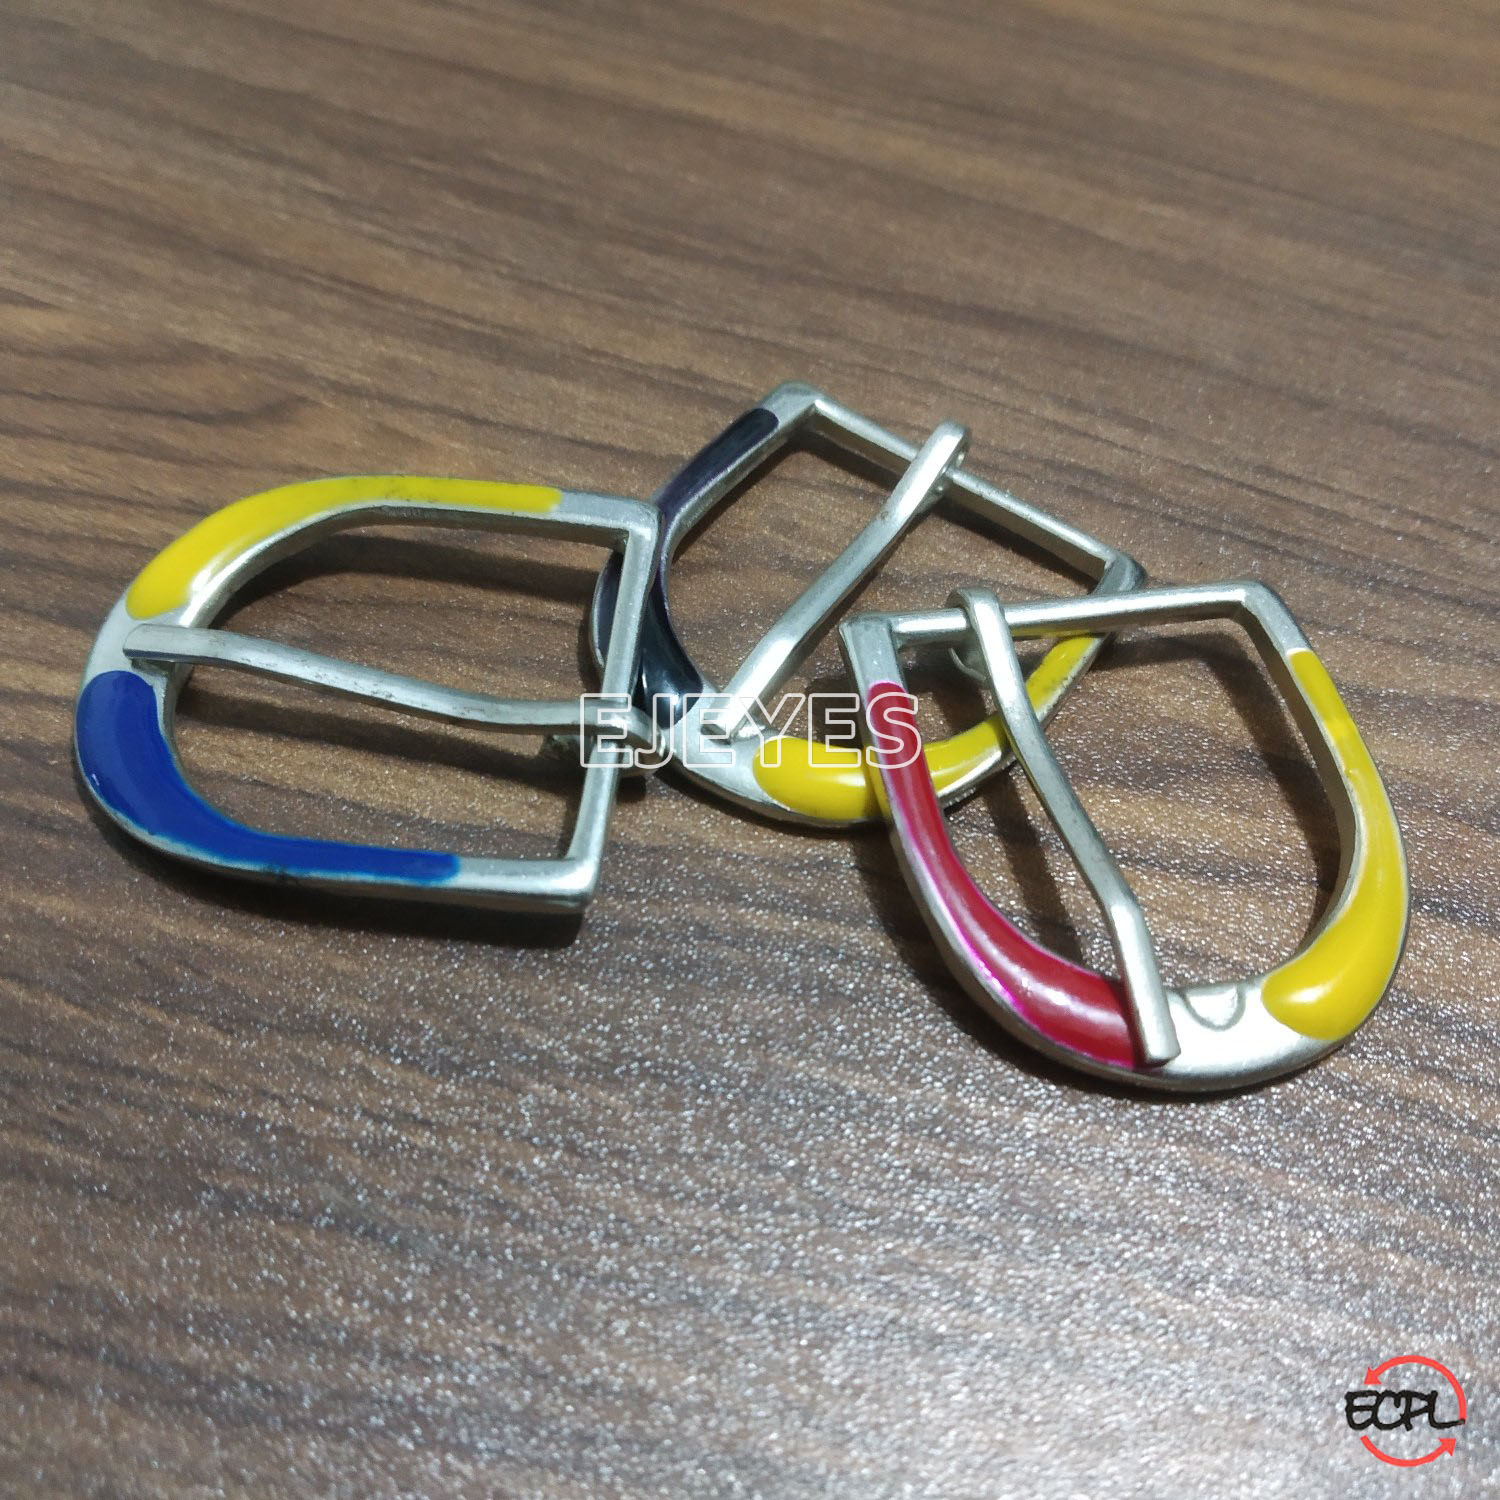 2W 25mm colorful buckle for hardware usage: vibrant and durable, ideal for secure fastening in various applications.